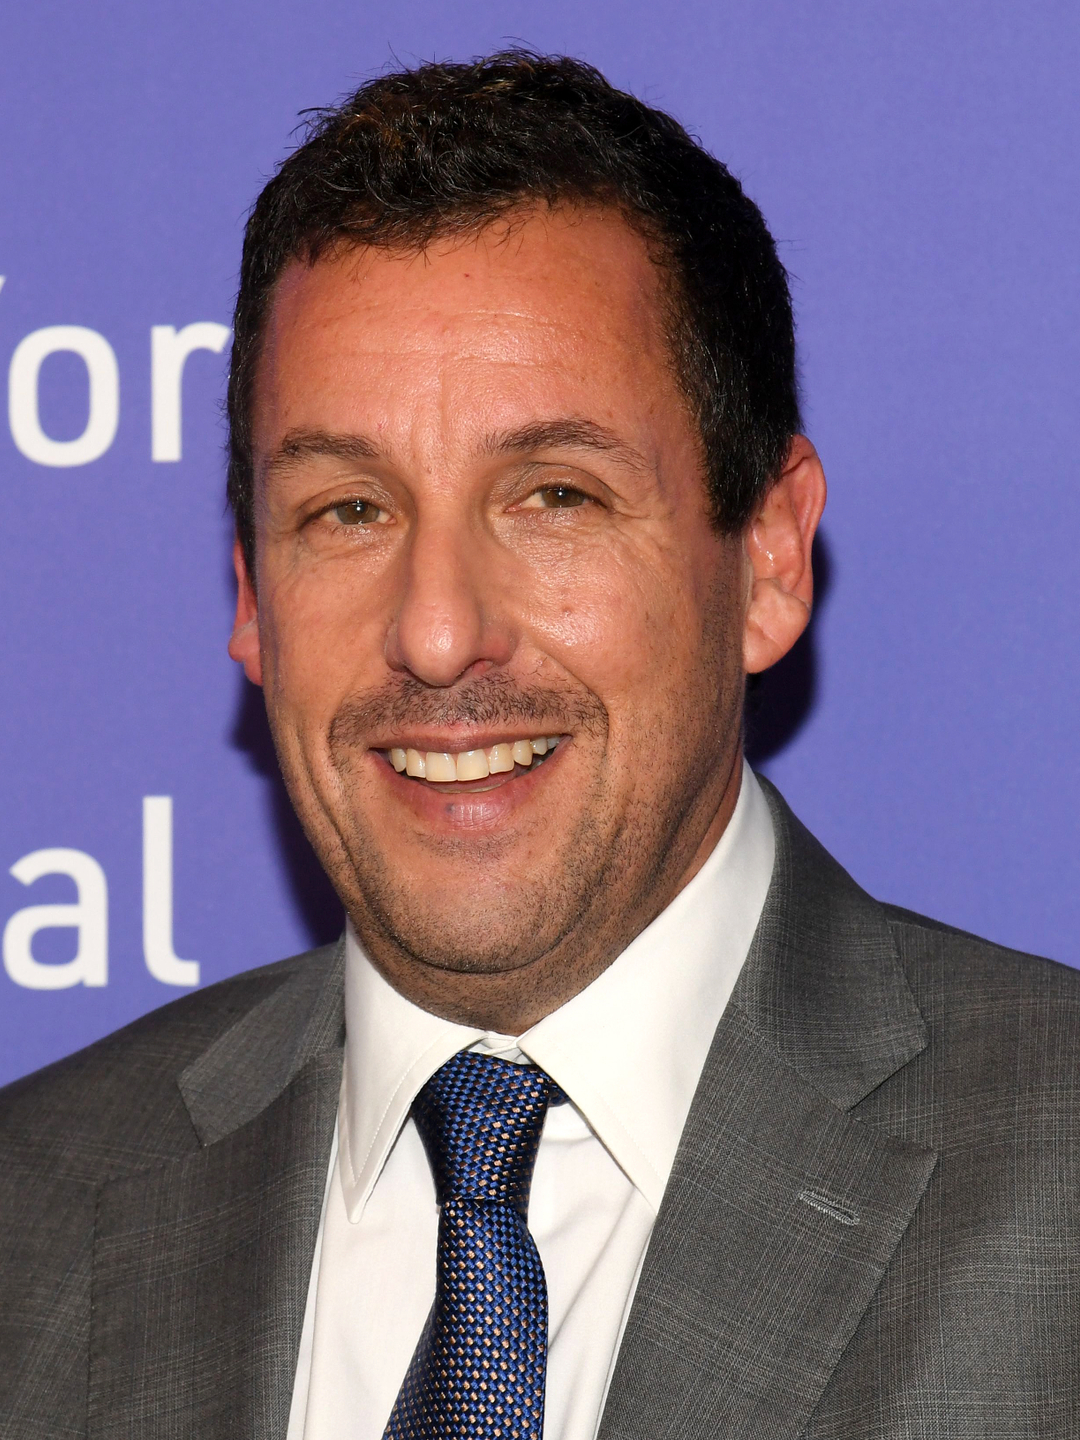 Adam Sandler does he have a wife